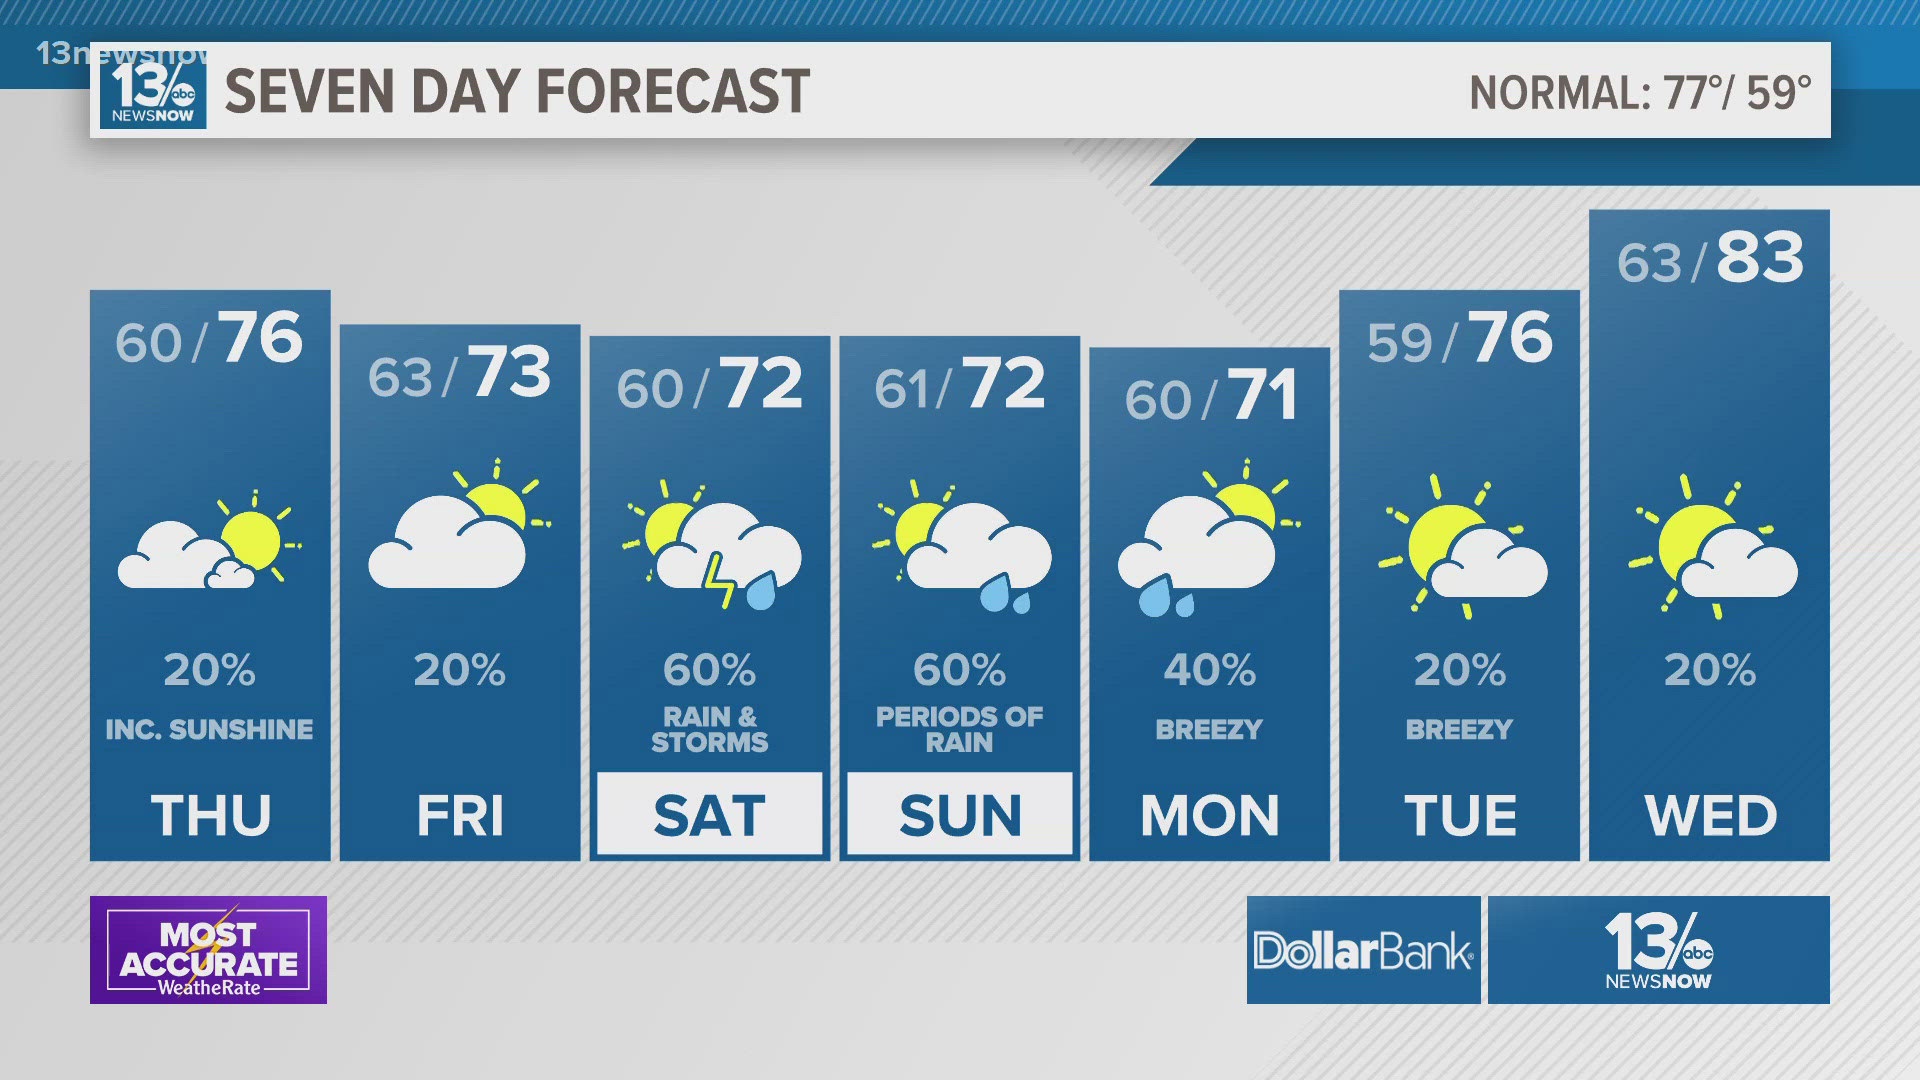 Rain chances pick up during the weekend.